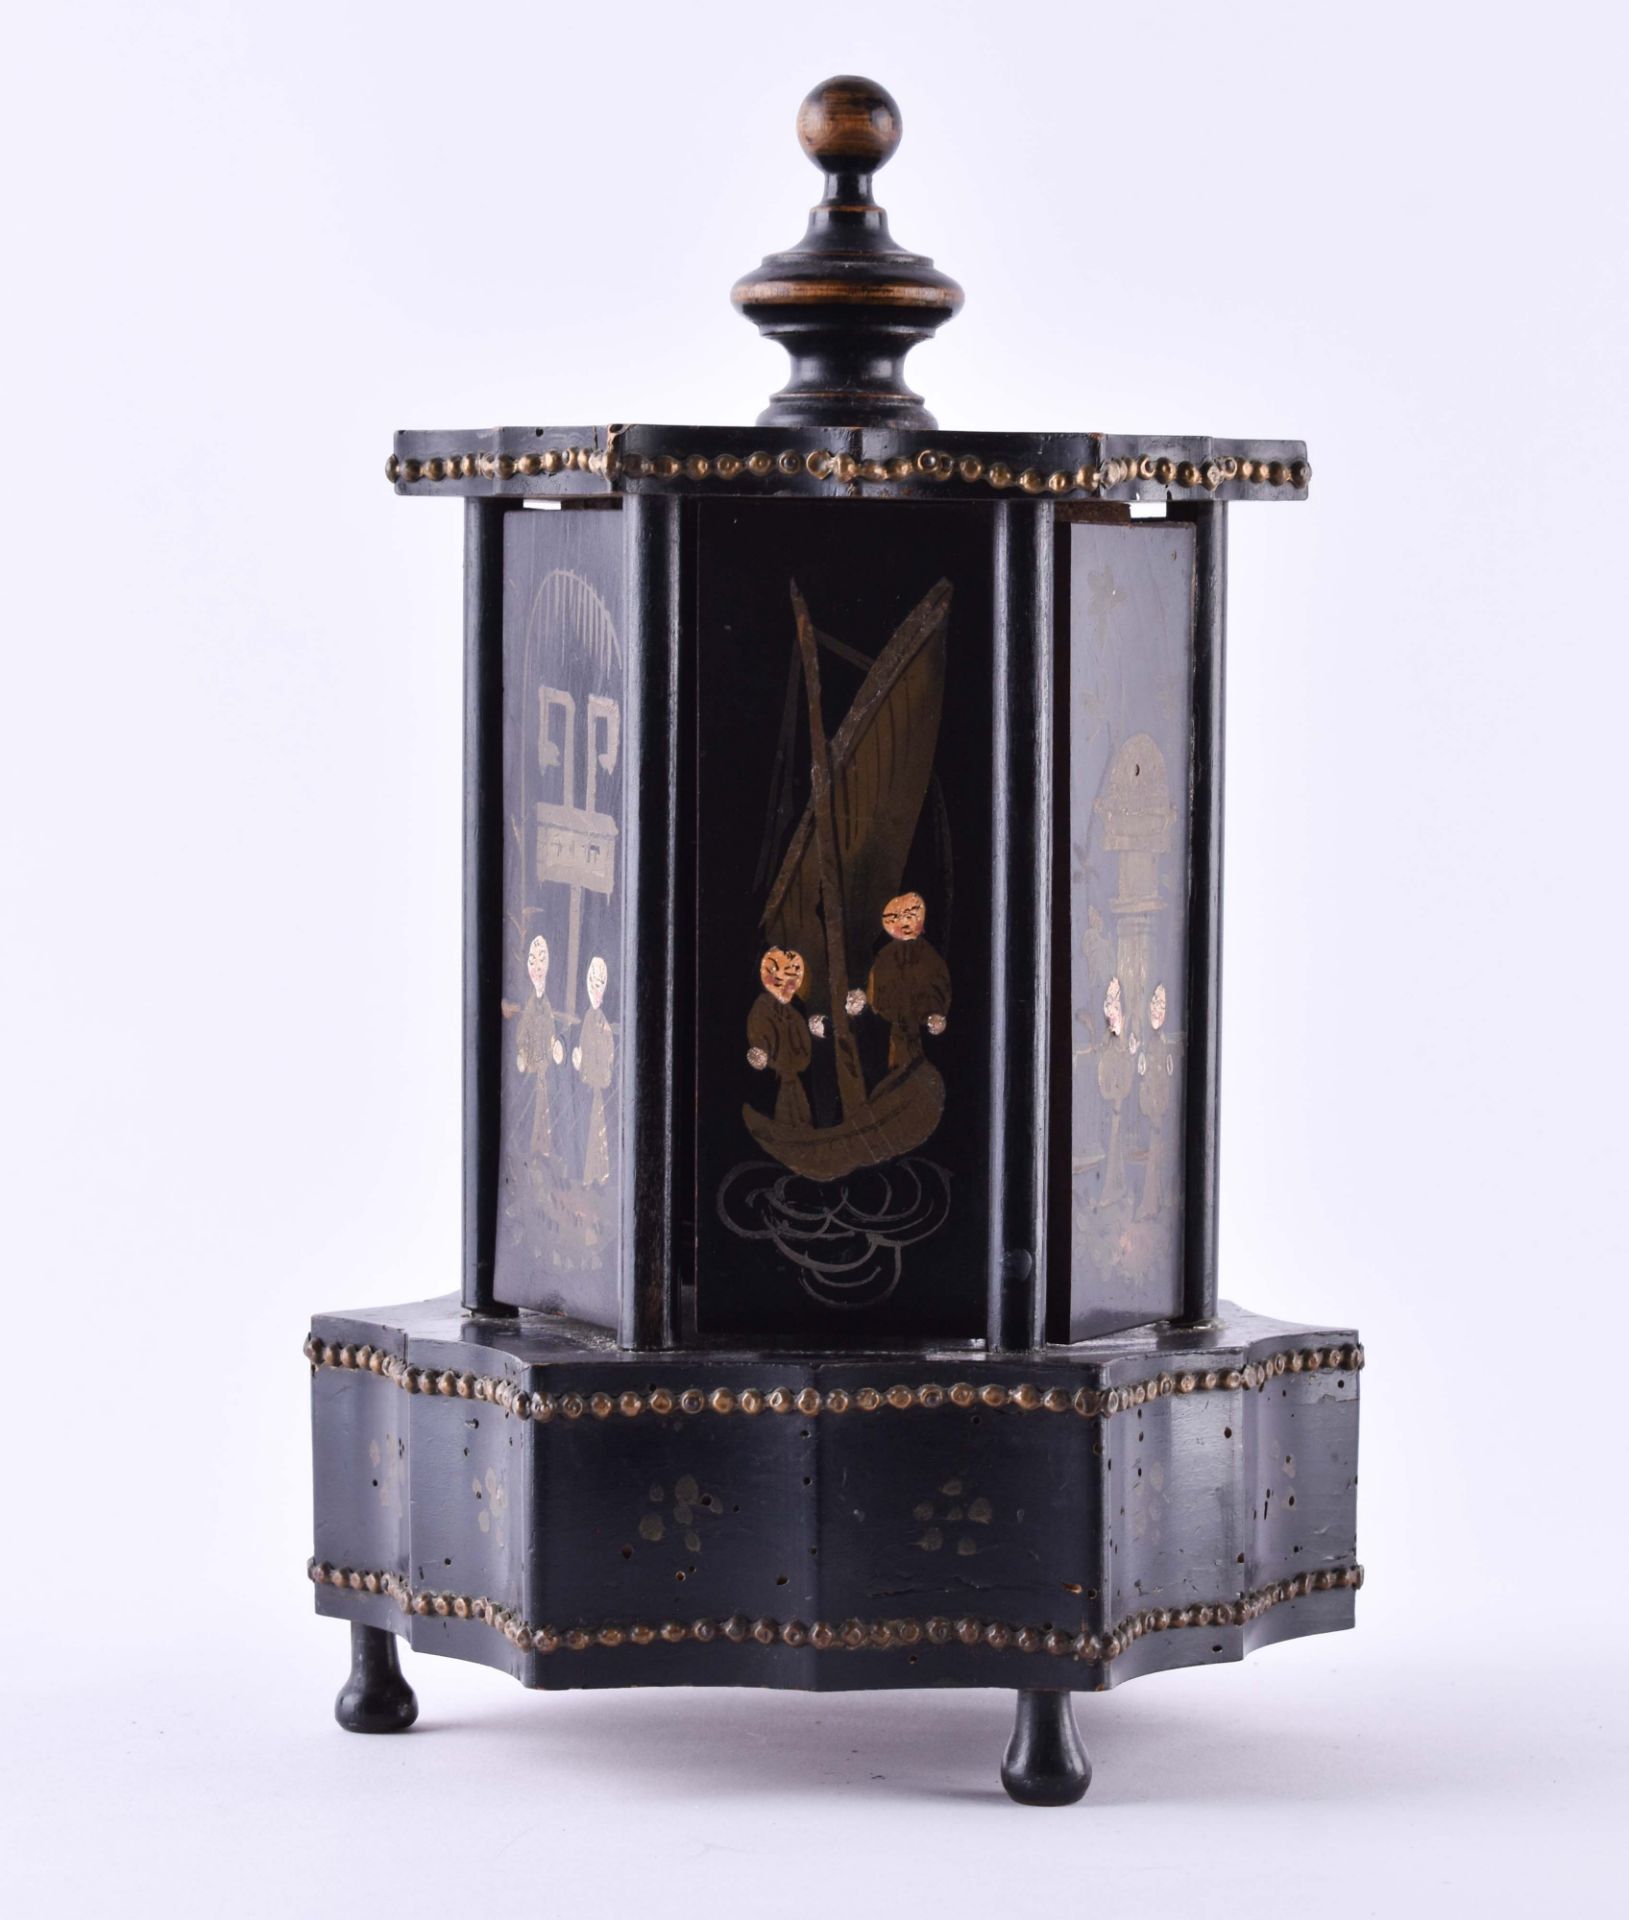 Cigar holder with music box probably England 19th century - Image 2 of 4